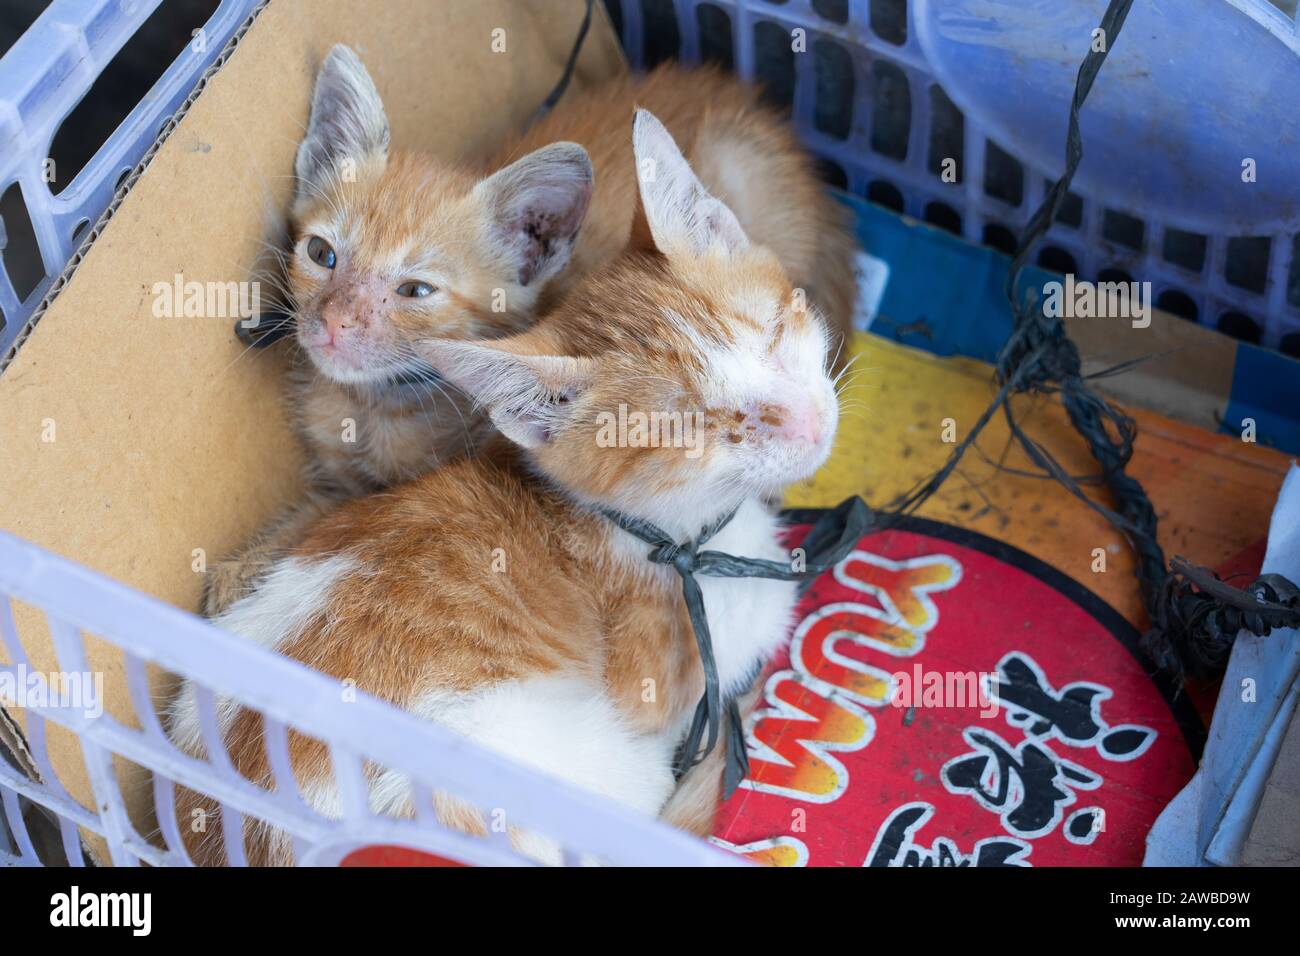 Kittens with a makeshift neck collar tied within a box on a street in Cebu City,Philippines. One kitten unable to open its eyes due to infection. Stock Photo